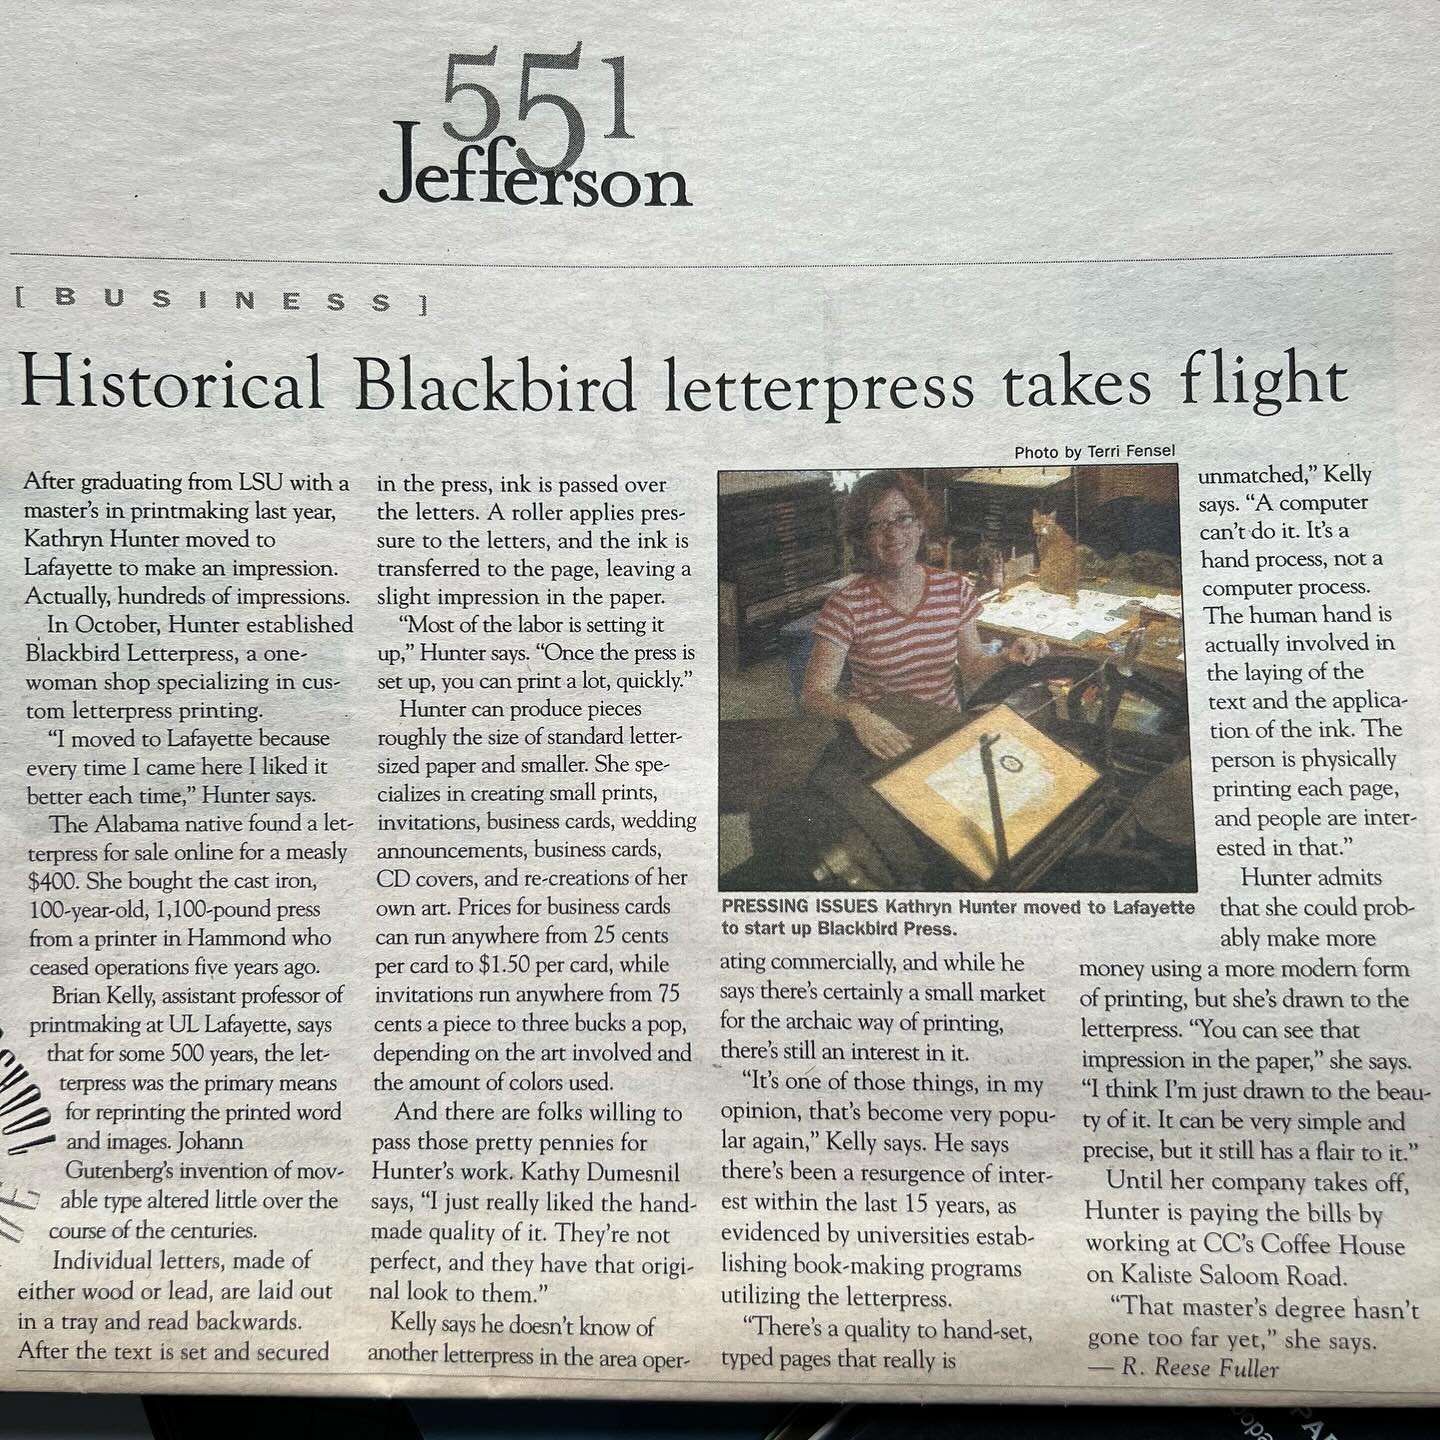 Ha! Throwback I found today in a flat file. 20 years ago, written up in The Independent in Lafayette, LA. Haha! When Blackbird was a one gal-one press show and I had short red hair!

@bfk0900 you&rsquo;re quoted in the article!

#buffalokitty is in t